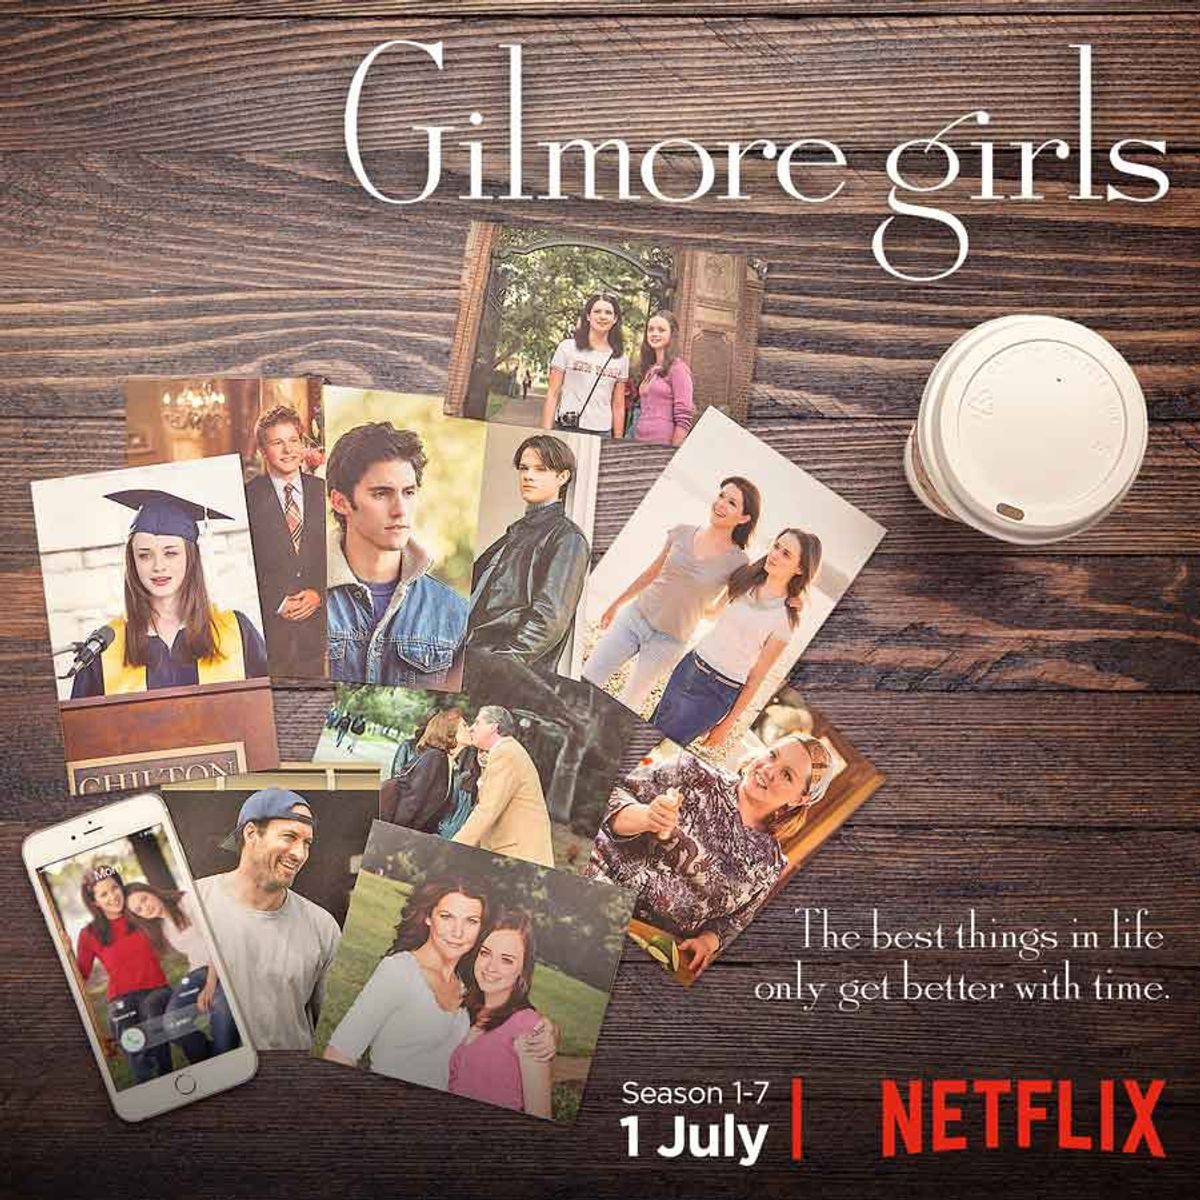 10 Random Facts About Plymouth, MA As Described By Gilmore Girls